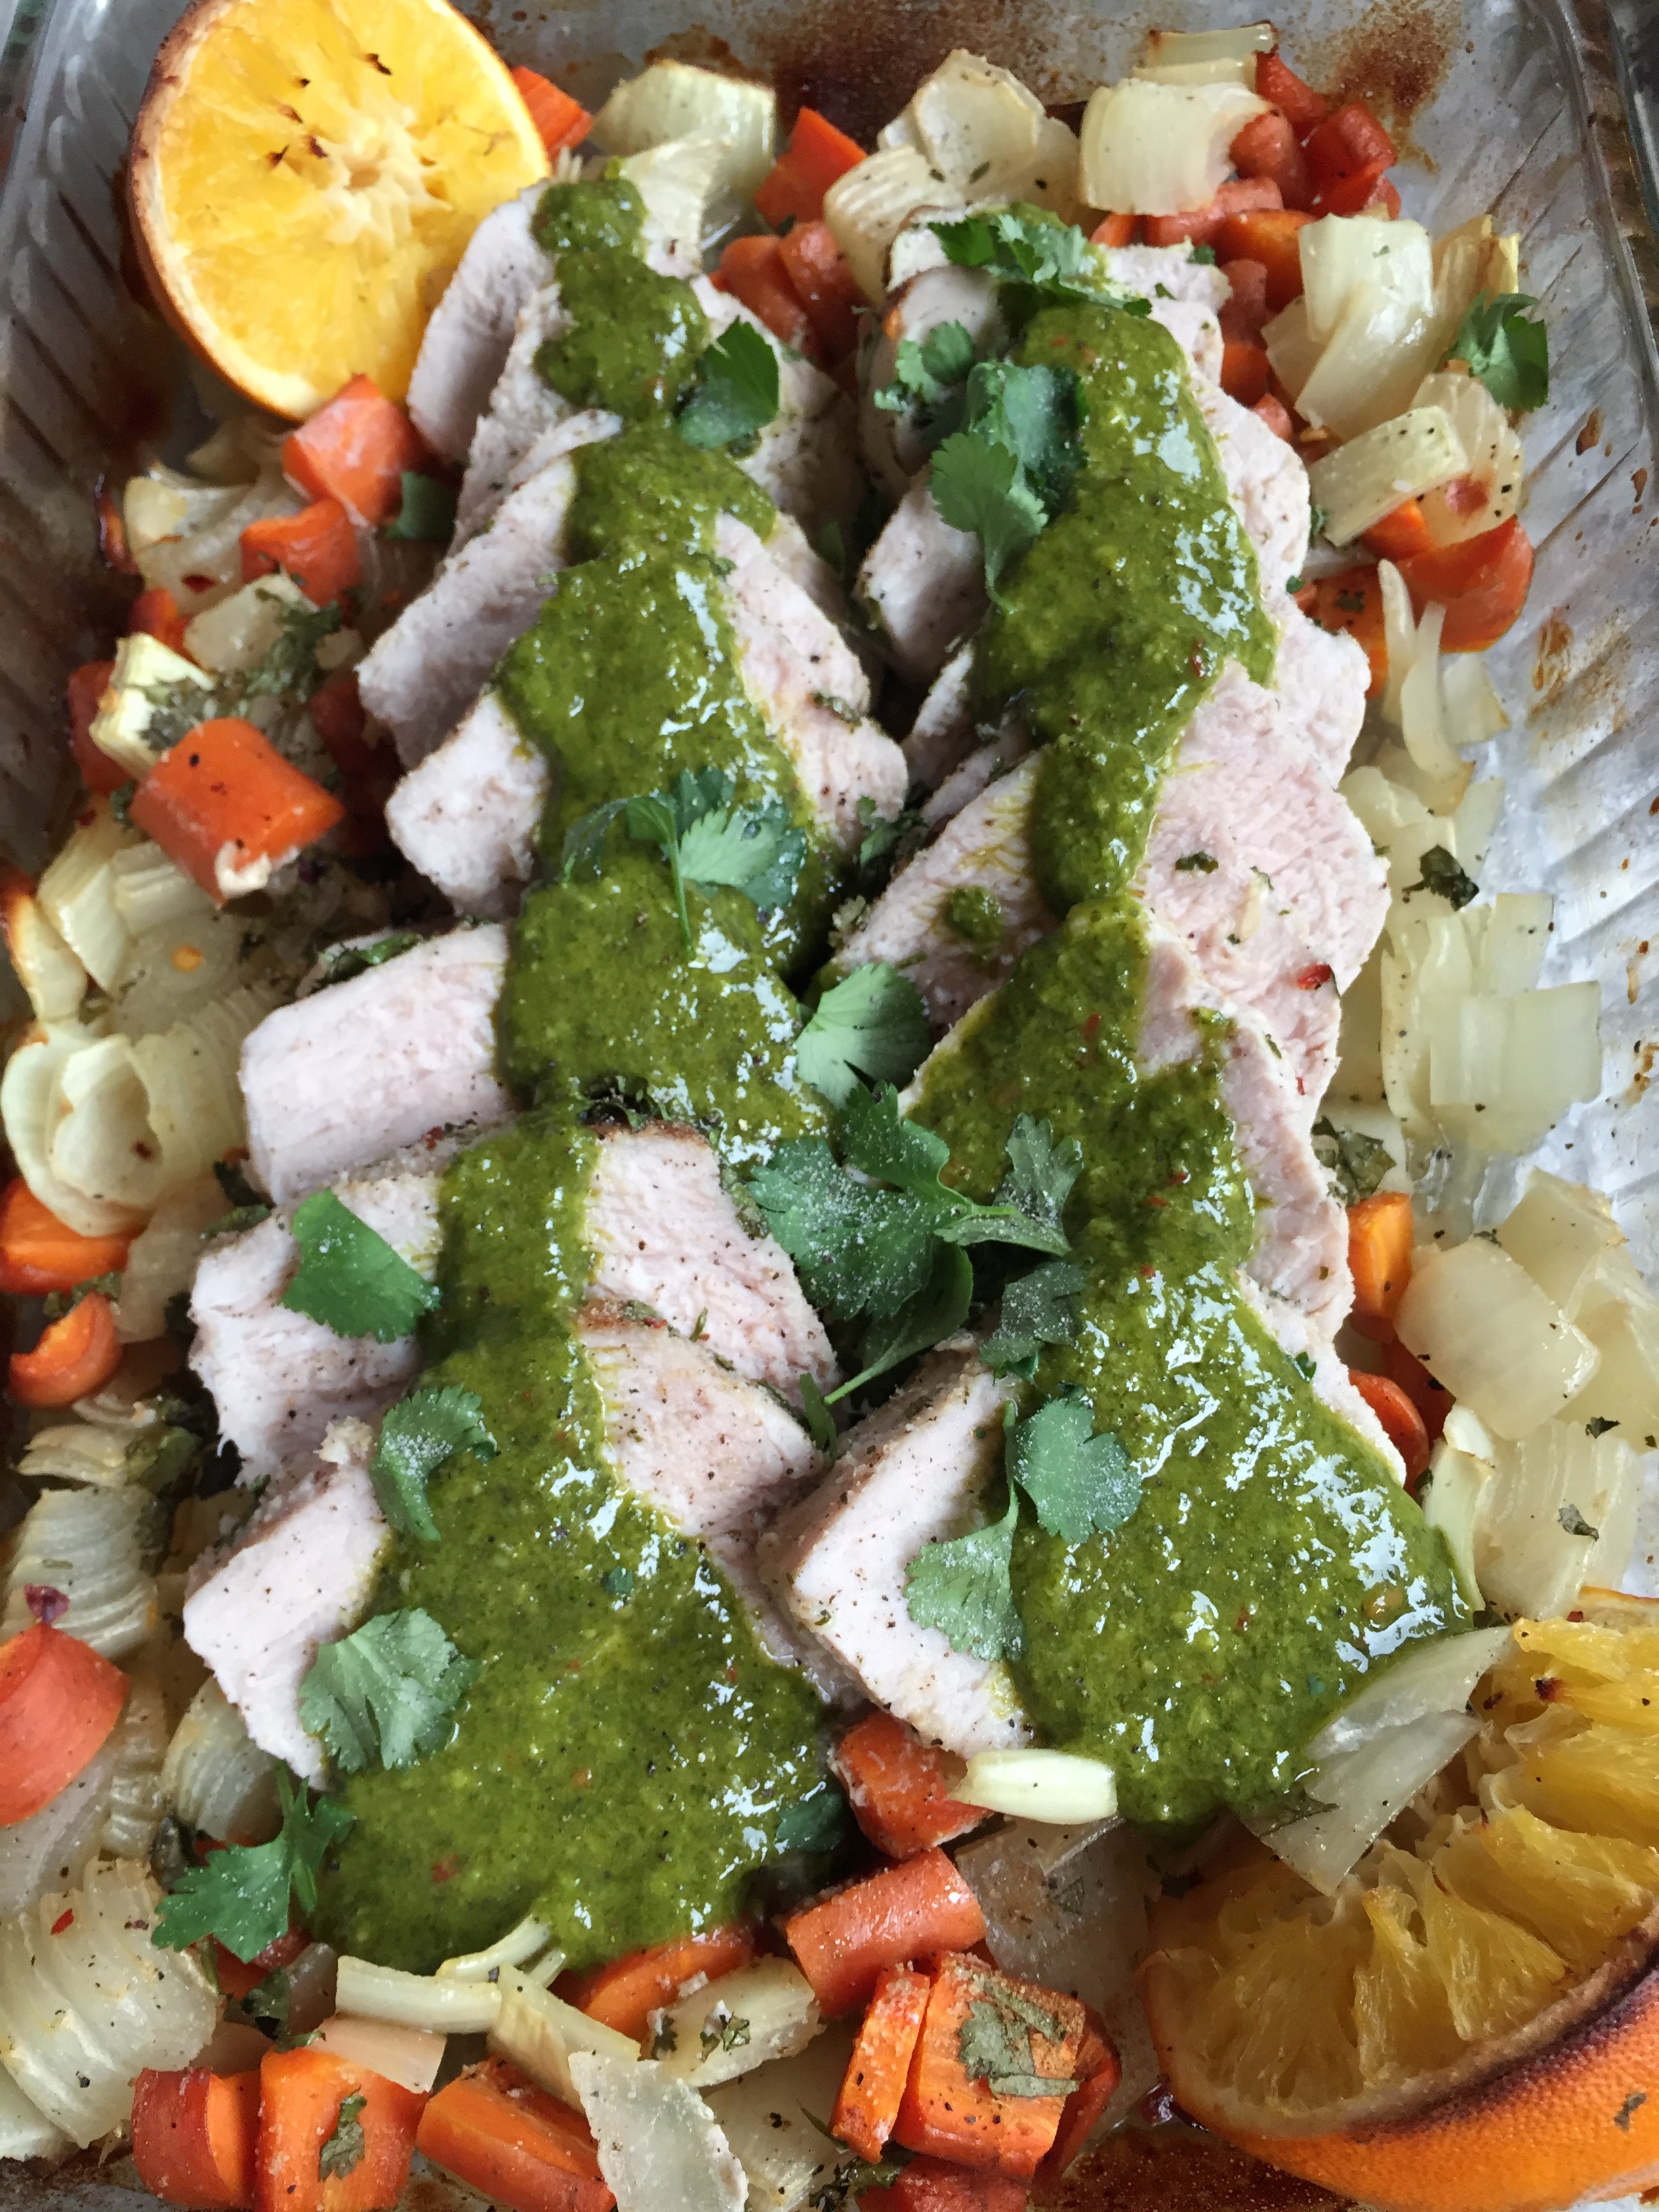 Citrus Roasted Pork Loin with Chimichurri Sauce and CIlantro Rice | Sweet Anna's